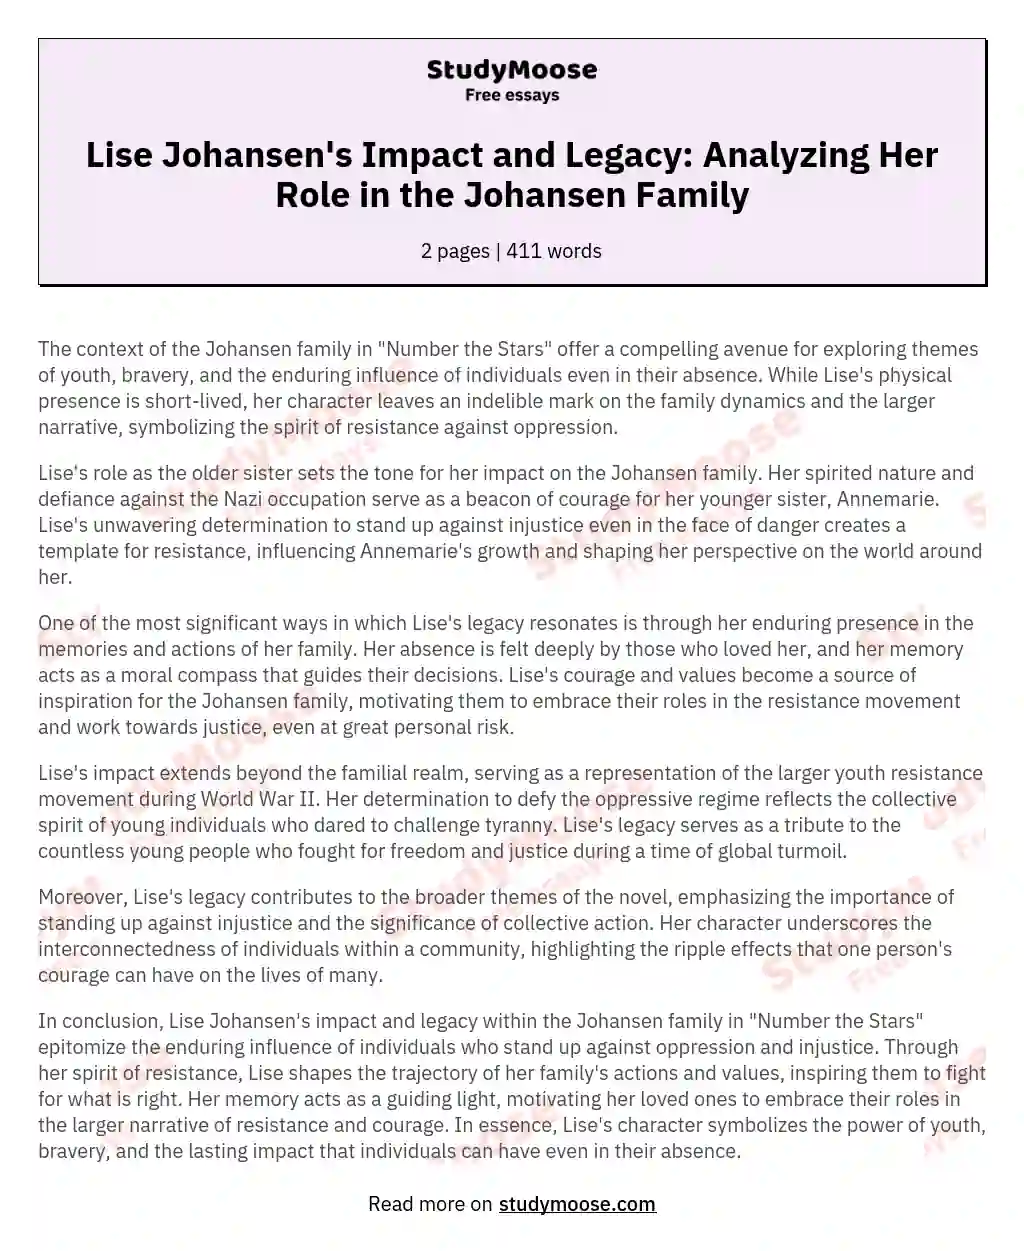 Lise Johansen's Impact and Legacy: Analyzing Her Role in the Johansen Family essay